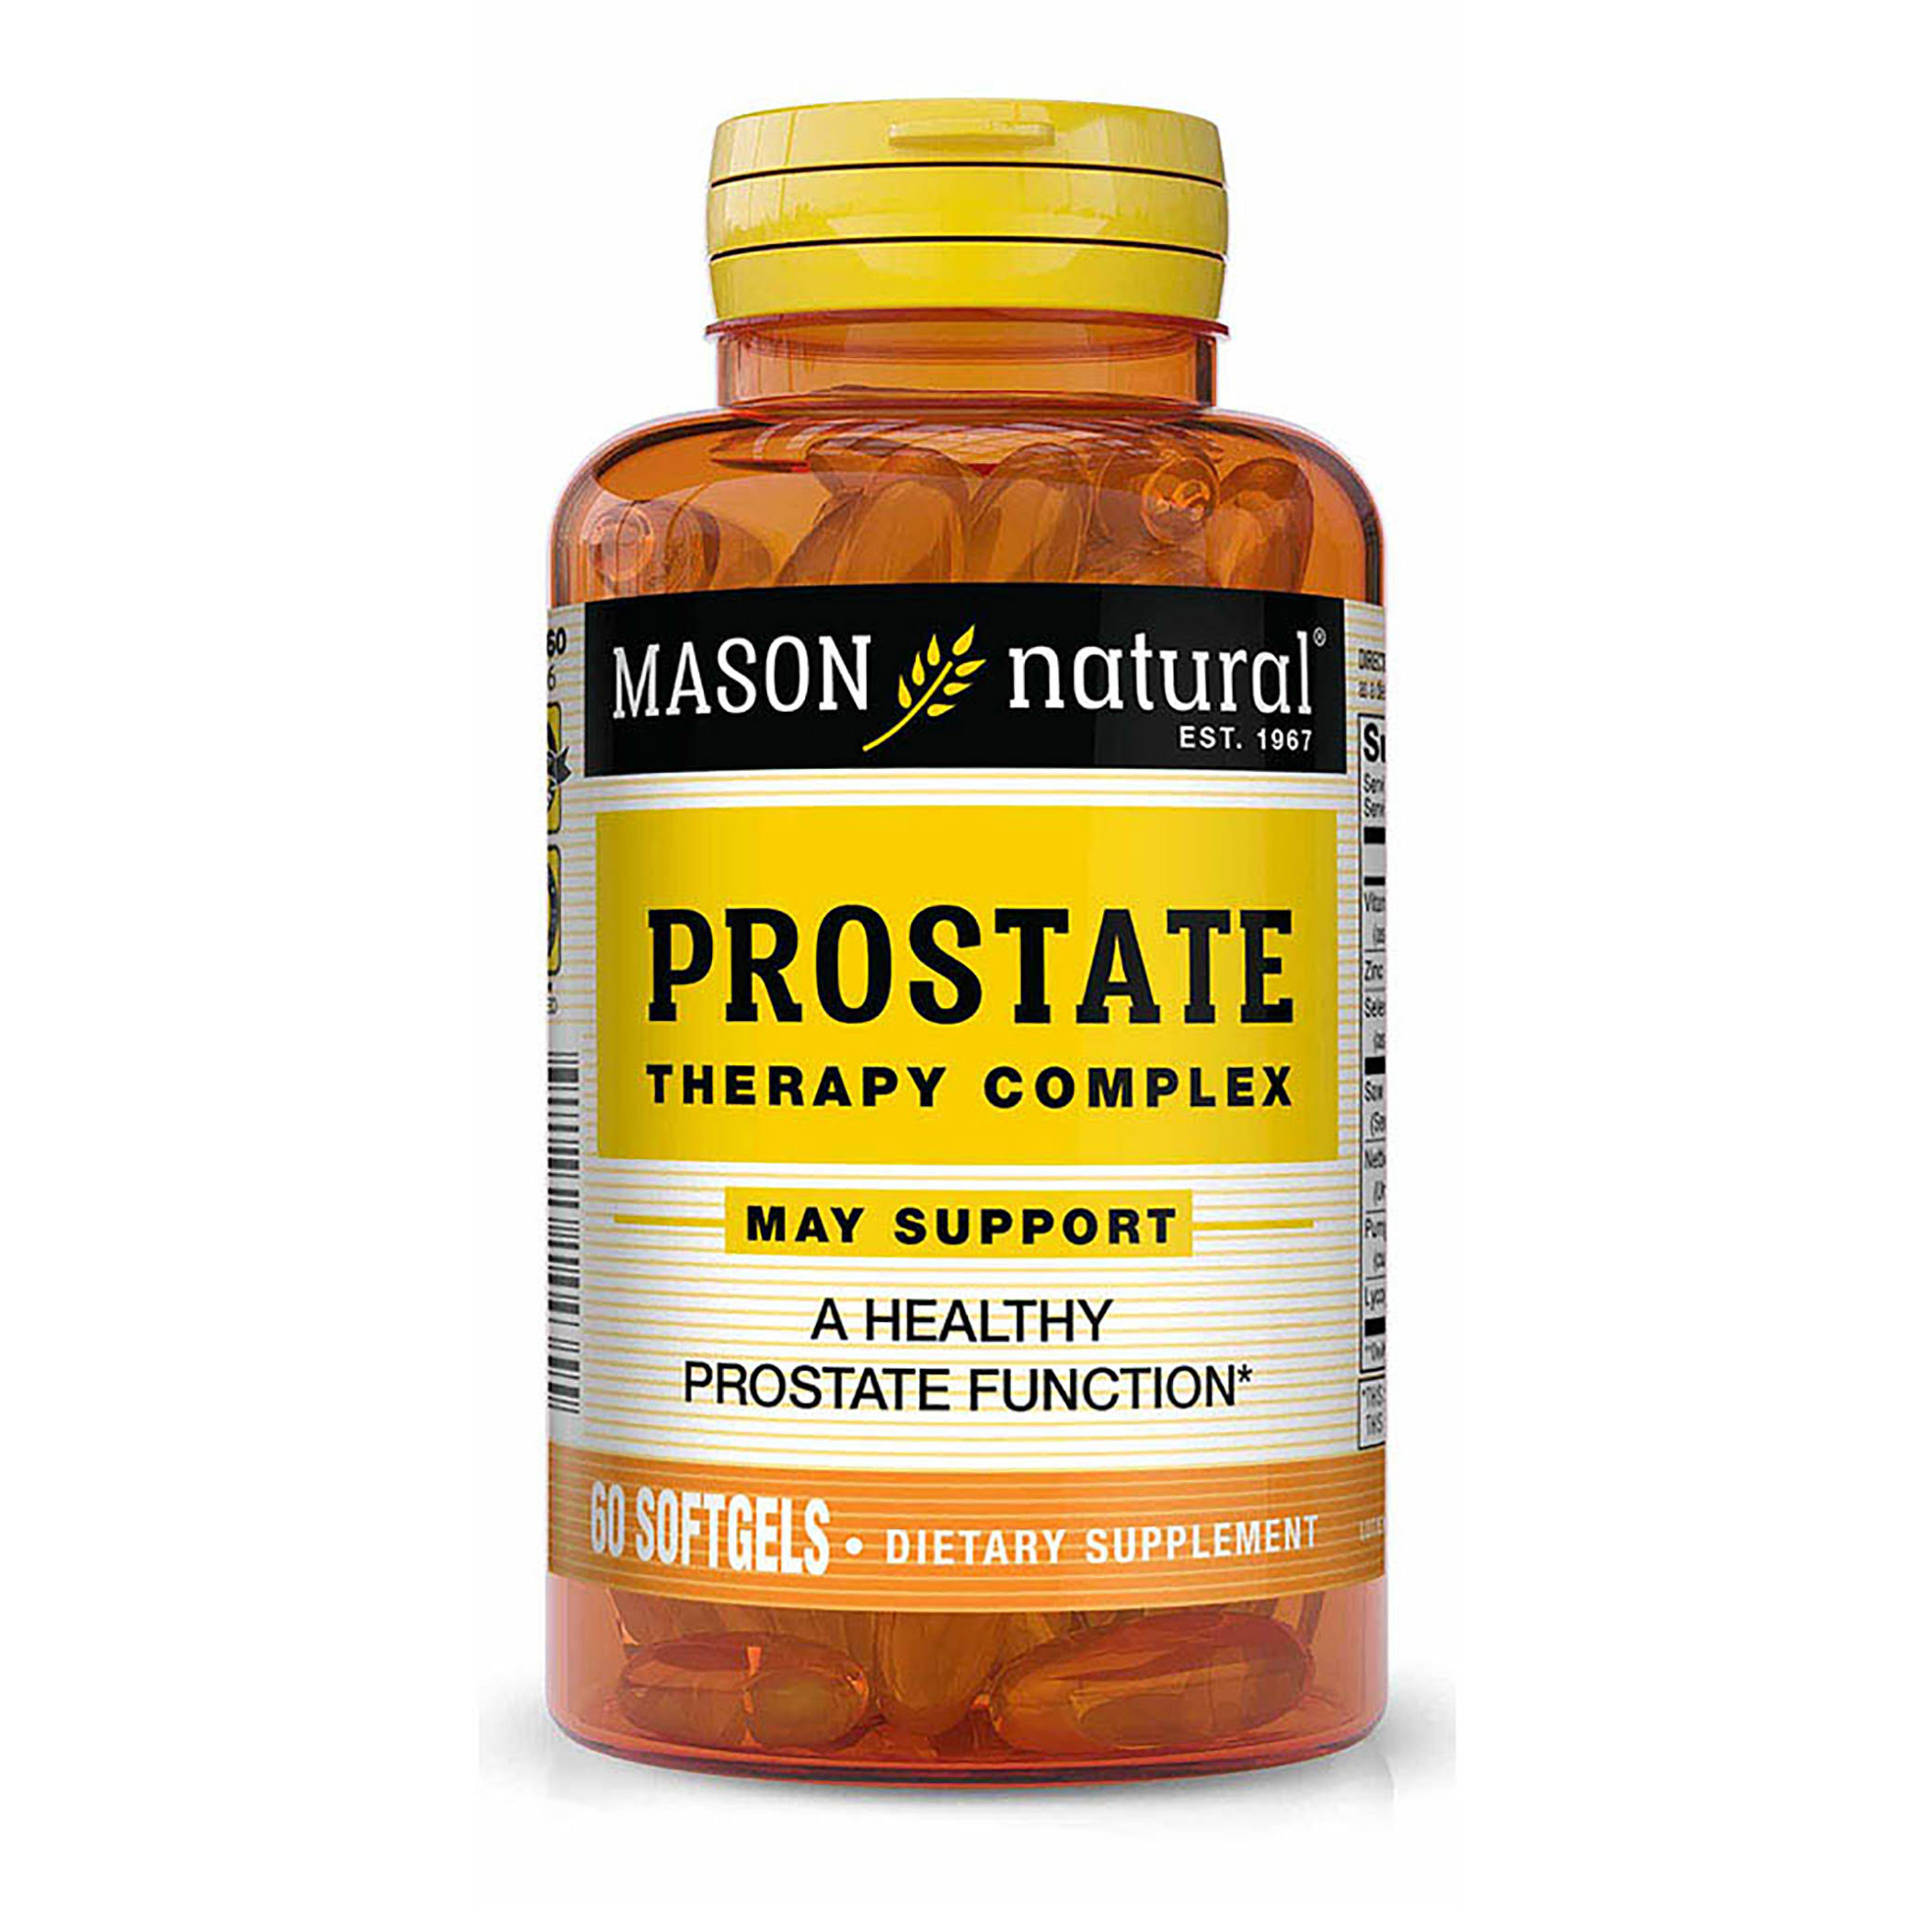 Mason Natural Prostate Therapy Complex Dietary Supplement - 60 Softgels